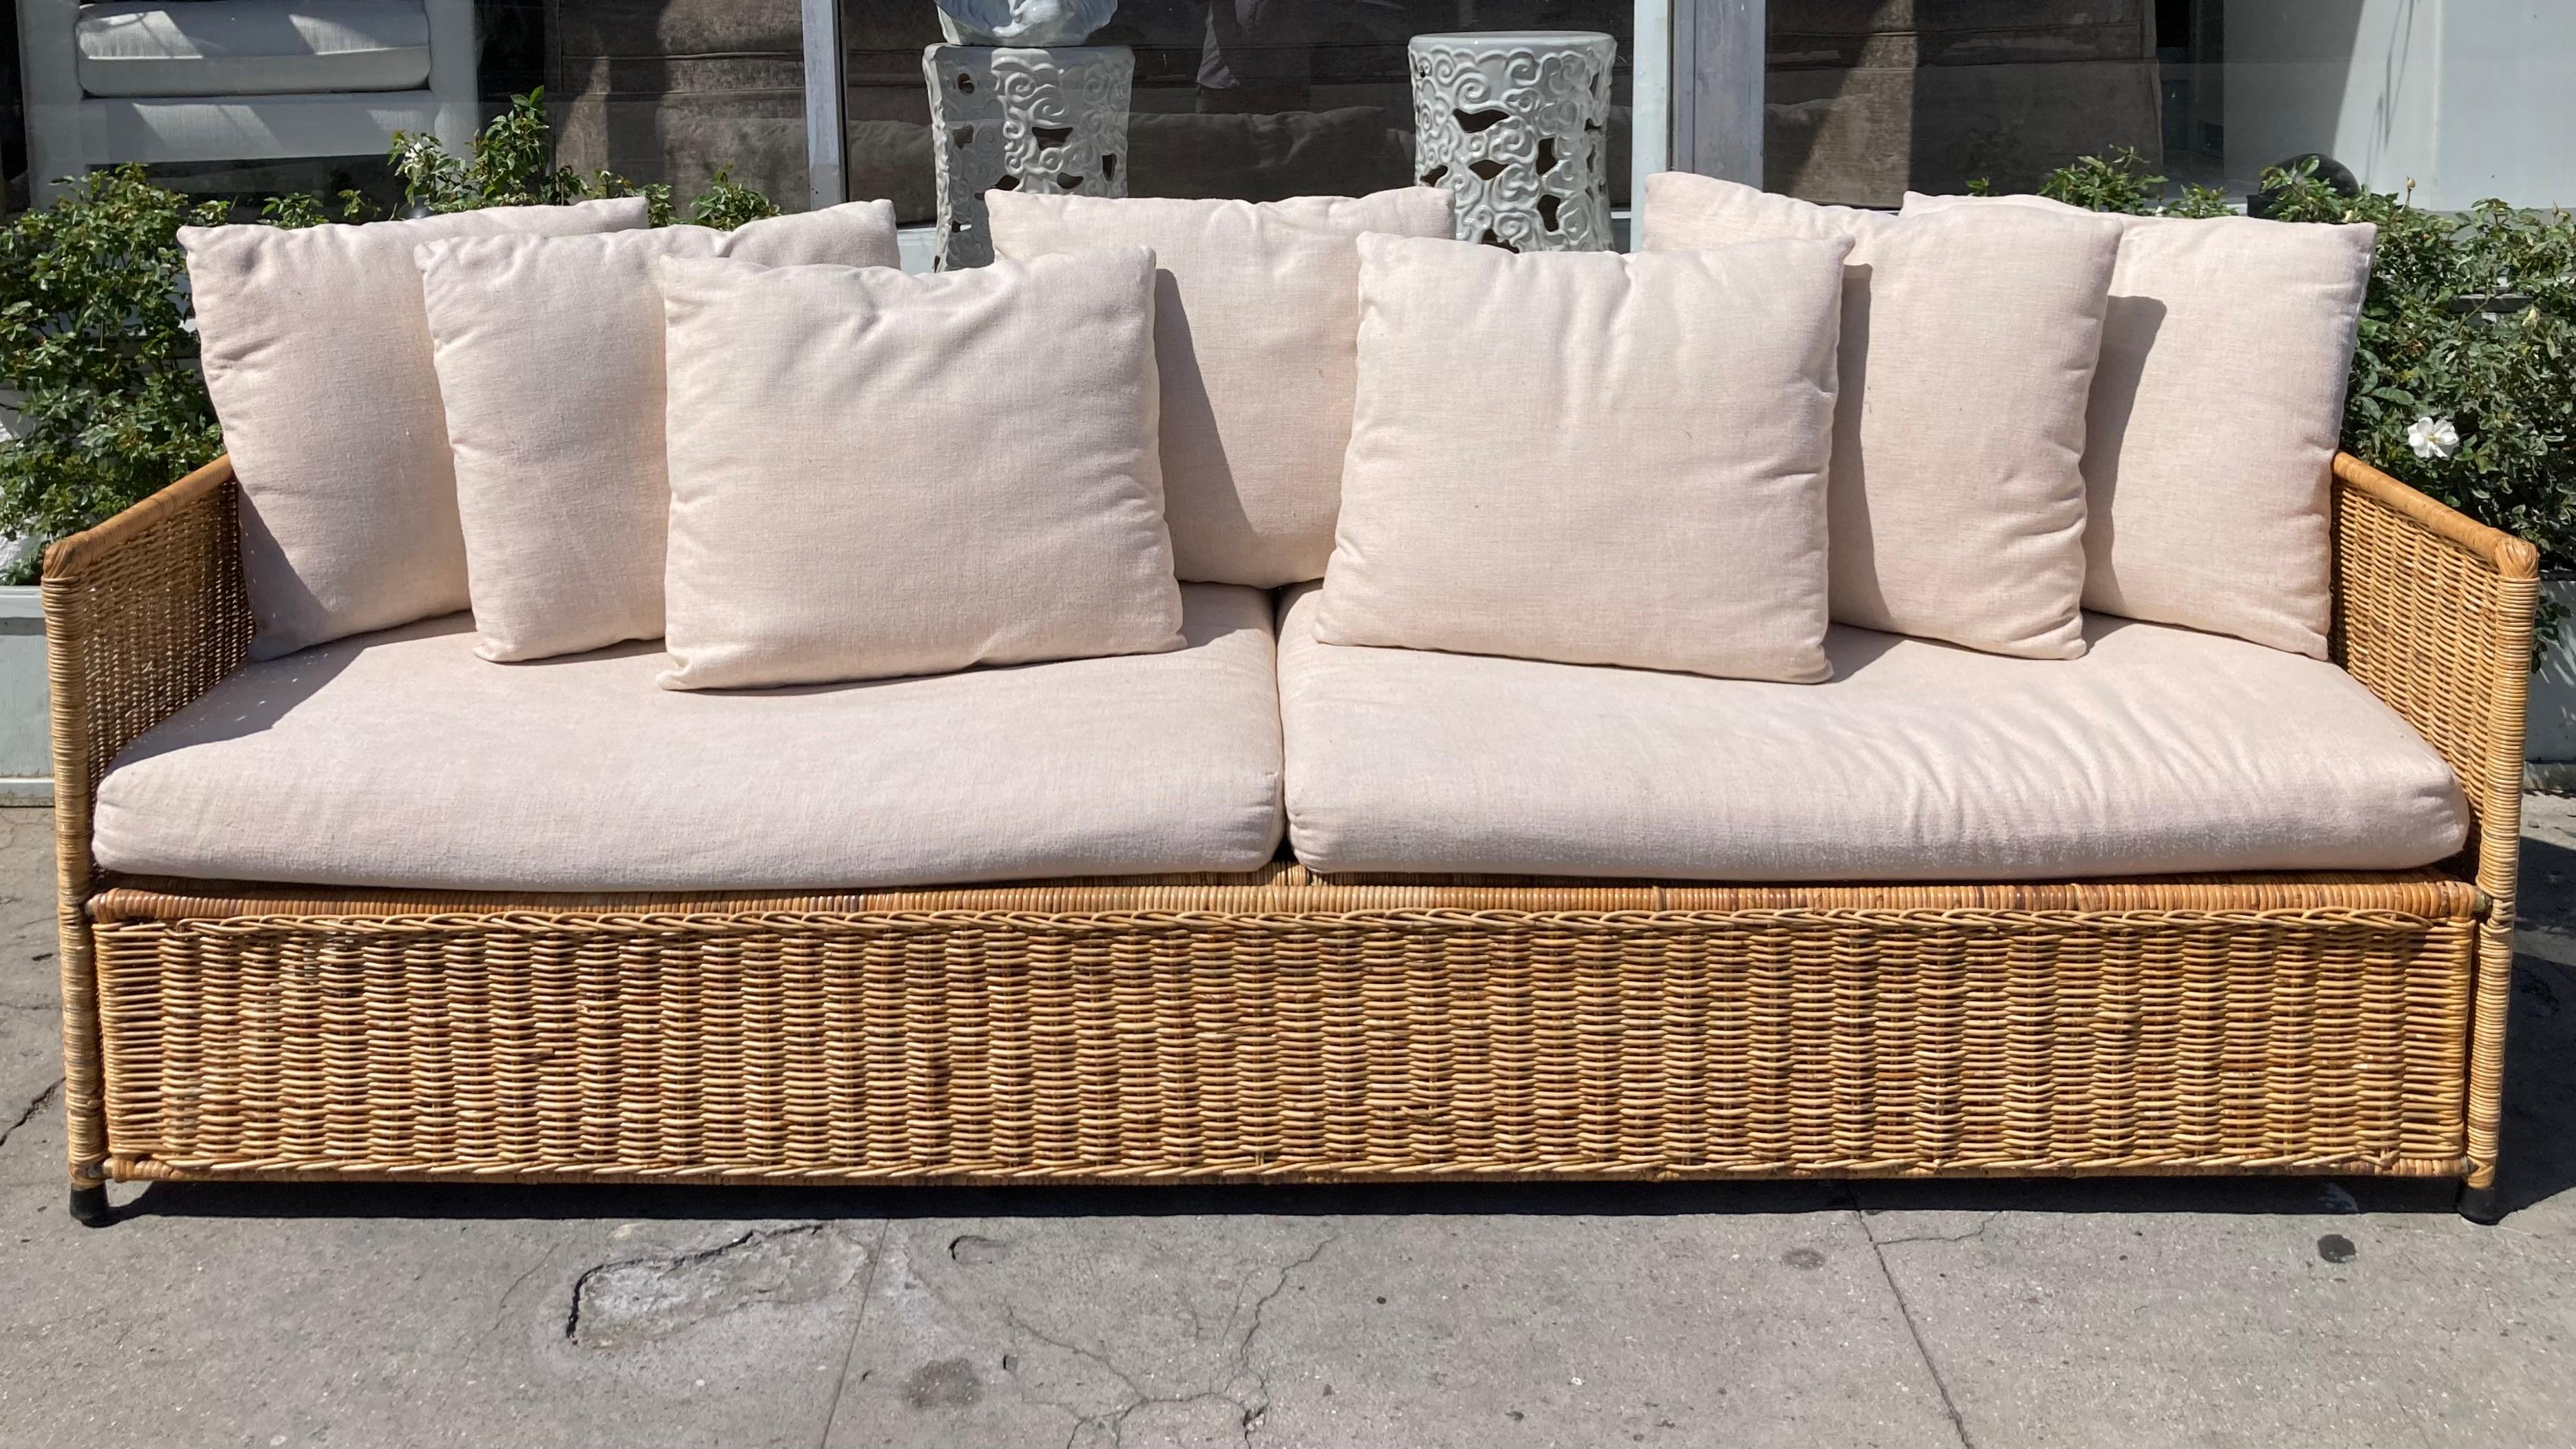 Gorgeous Malibu Italian wicker vintage sofa from the 1970s. Beautiful modern wicker design with simple square details. Love the combination of natural wicker and natural linen upholstery and is in very good condition for its age.